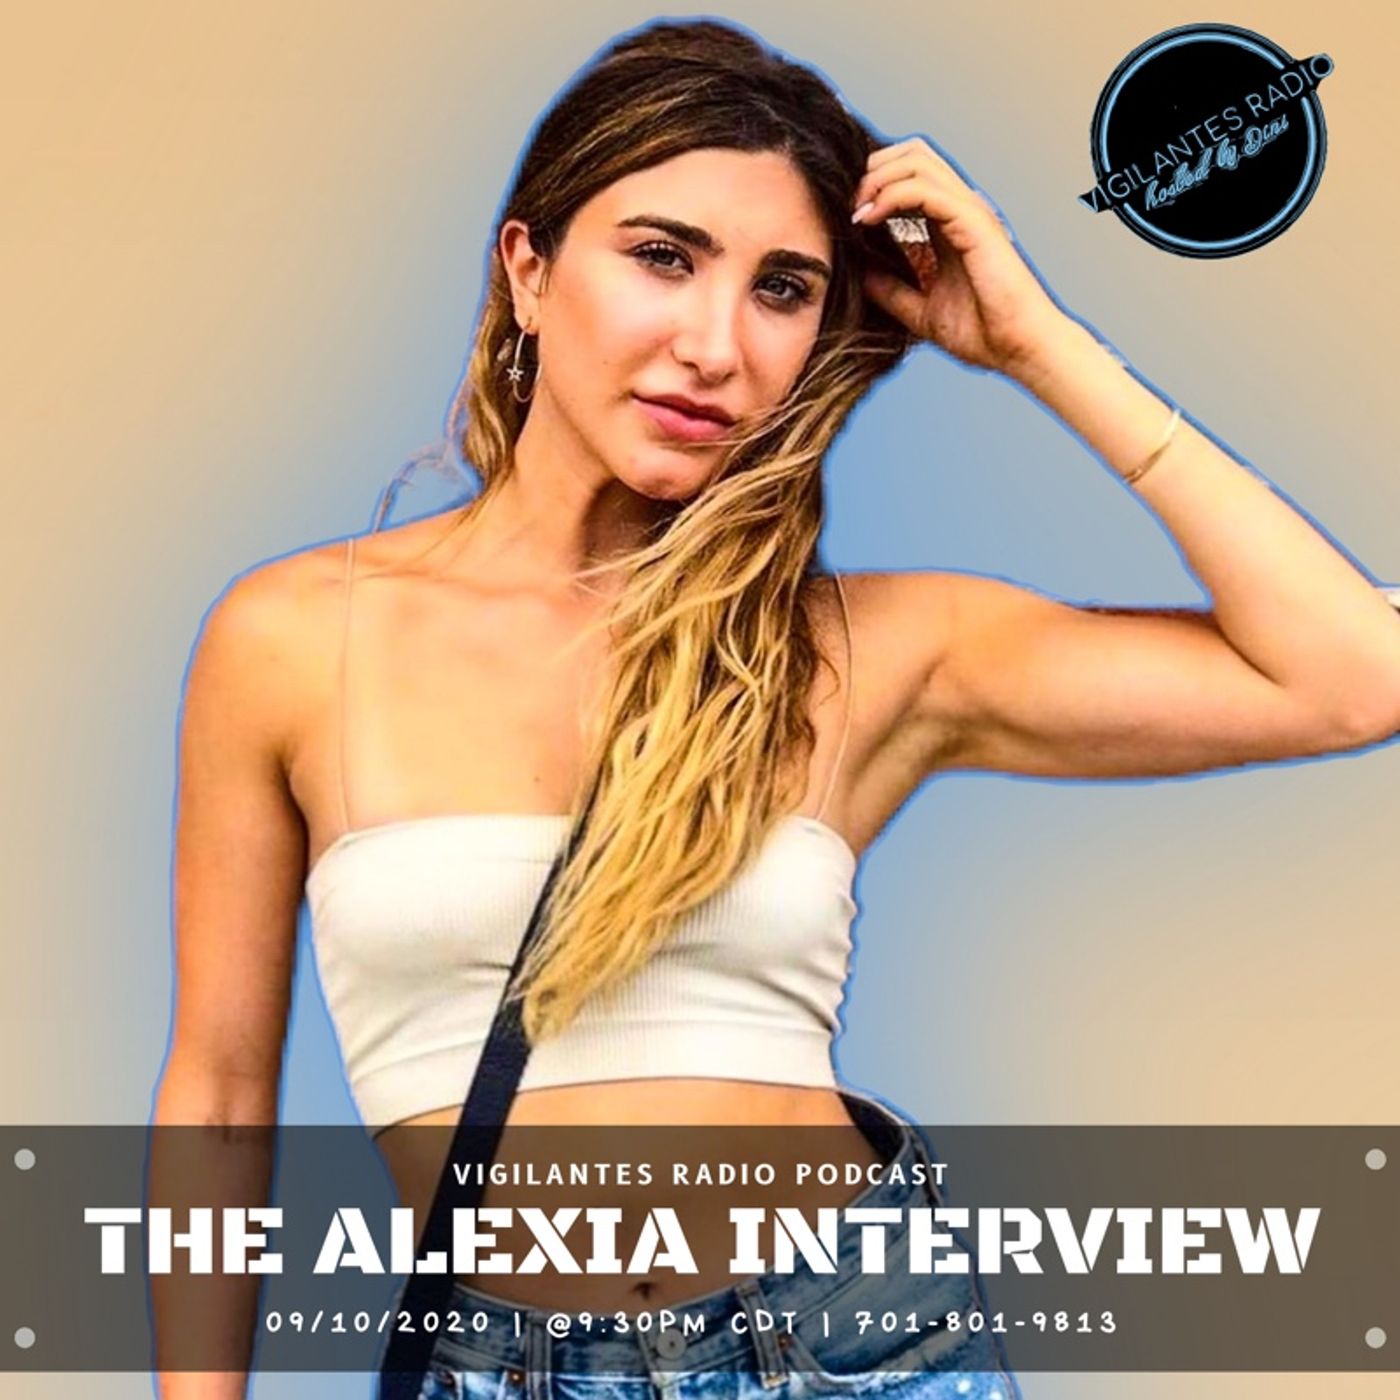 The Alexia Interview. Image